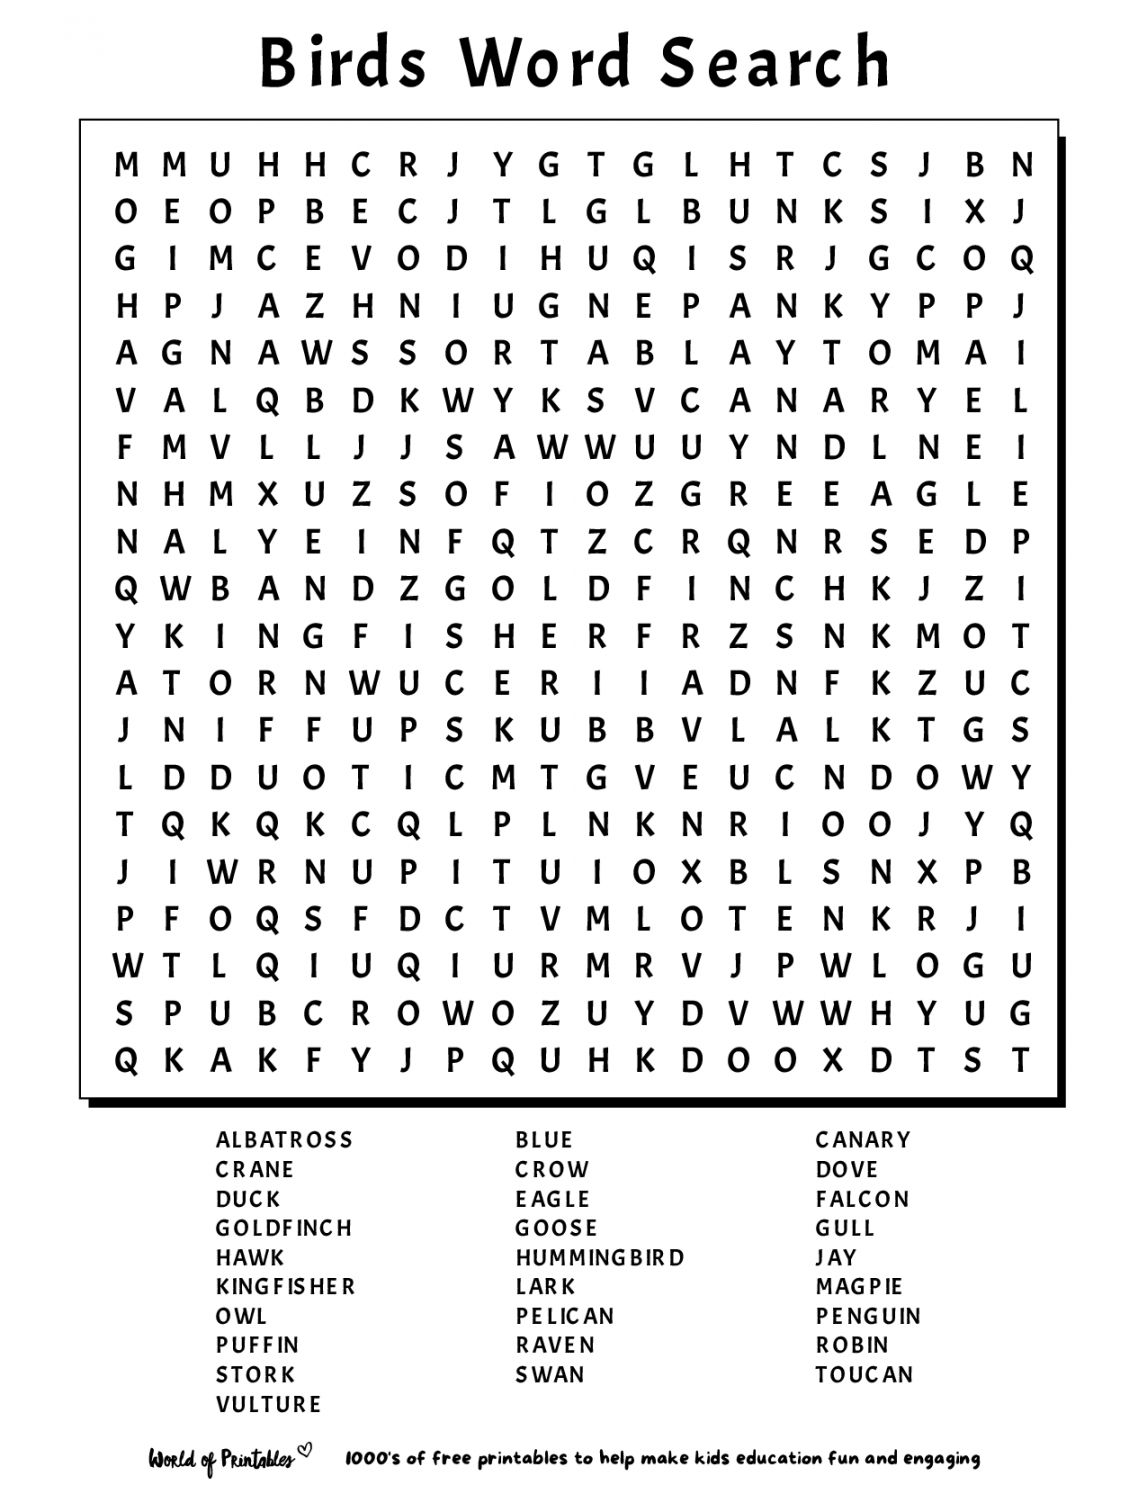 Free Printable Word Searches Large Print - Printable - Printable Word Search  World of Printables